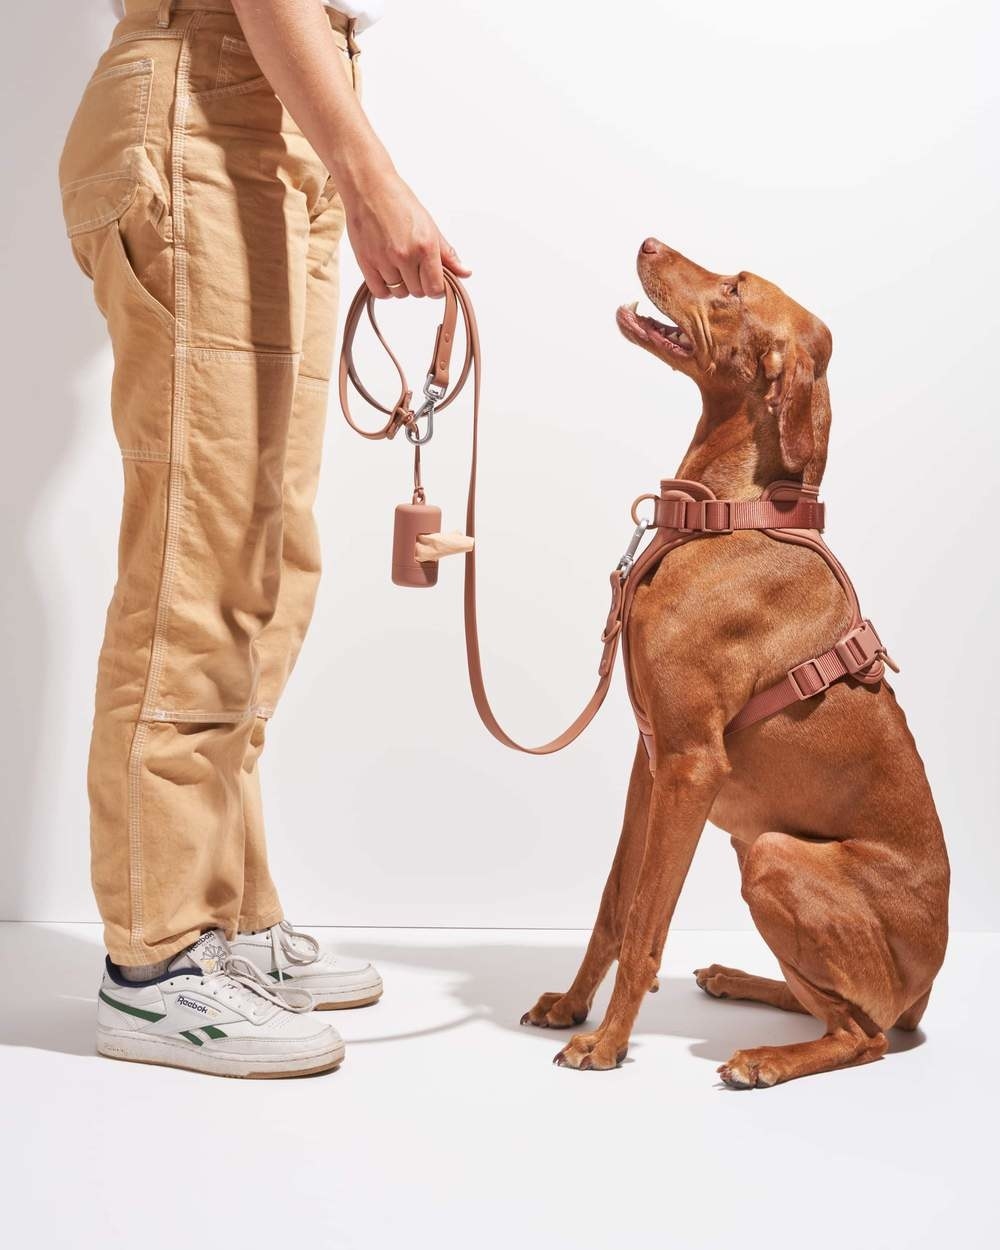 large tan dog wearing cocoa-colored harness connected to a matching leash and poop bag holder